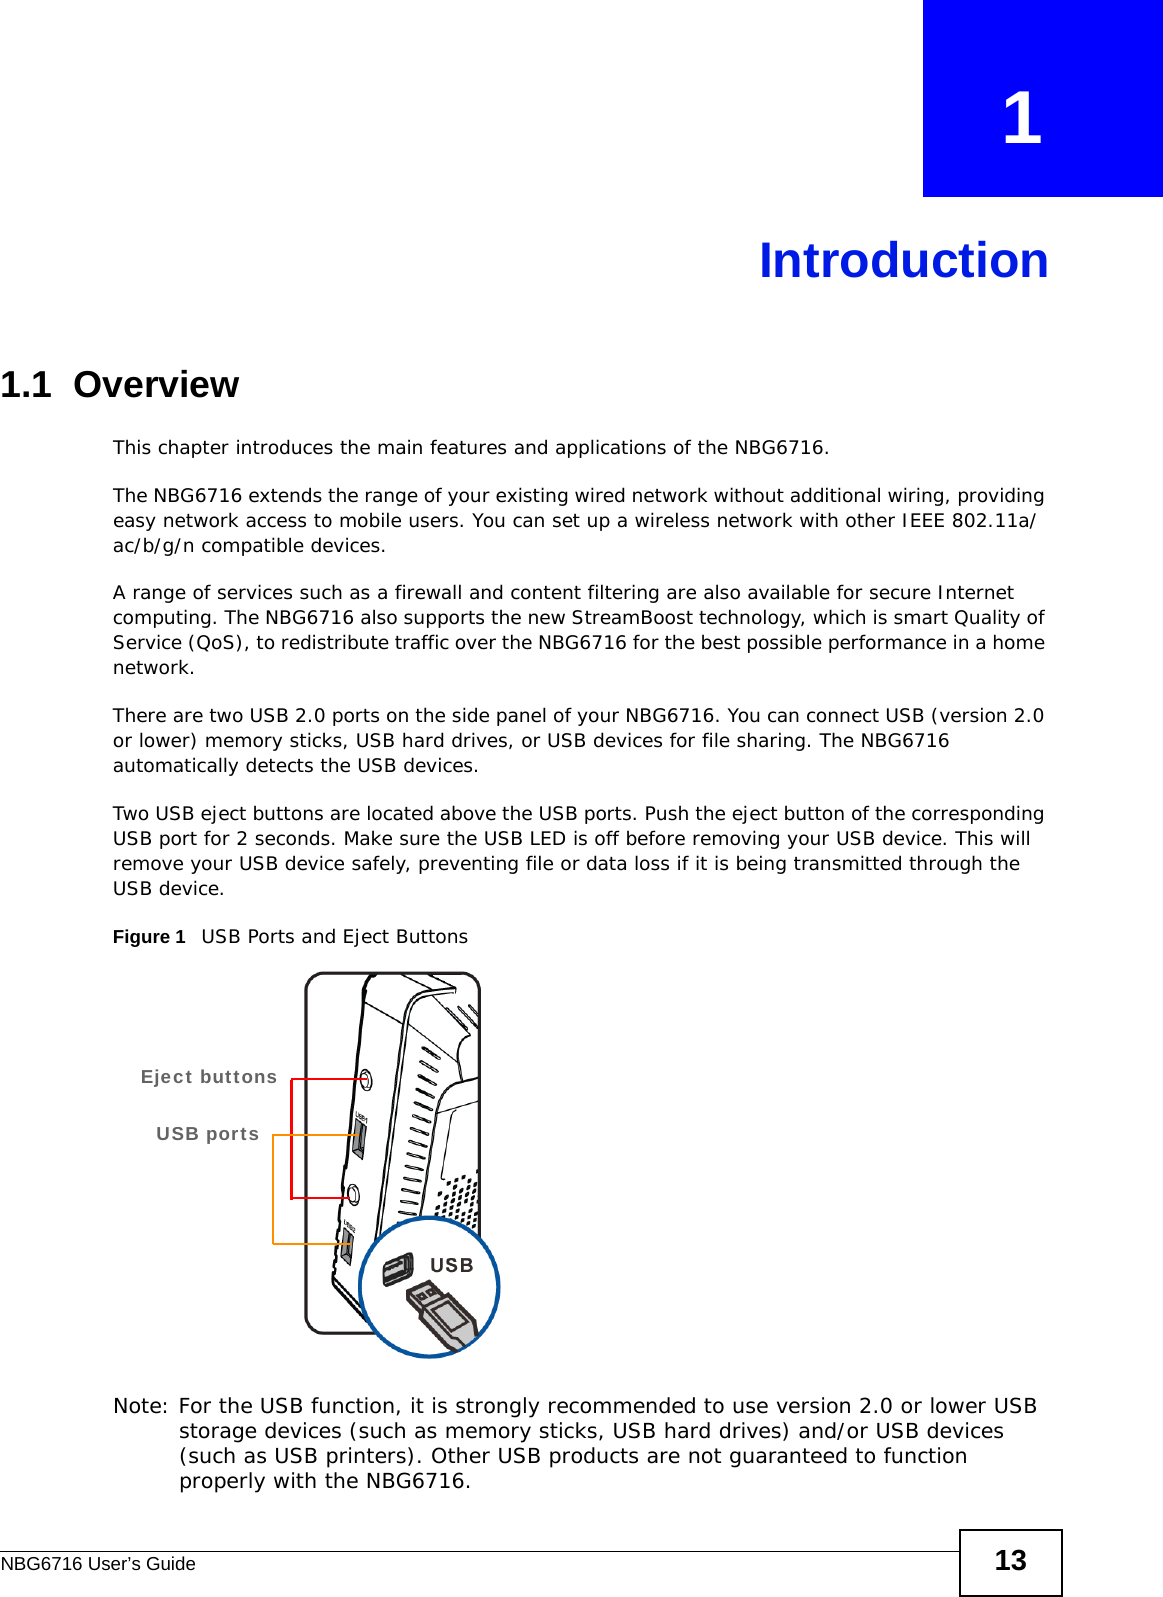 NBG6716 User’s Guide 13CHAPTER   1Introduction1.1  OverviewThis chapter introduces the main features and applications of the NBG6716.The NBG6716 extends the range of your existing wired network without additional wiring, providing easy network access to mobile users. You can set up a wireless network with other IEEE 802.11a/ac/b/g/n compatible devices. A range of services such as a firewall and content filtering are also available for secure Internet computing. The NBG6716 also supports the new StreamBoost technology, which is smart Quality of Service (QoS), to redistribute traffic over the NBG6716 for the best possible performance in a home network. There are two USB 2.0 ports on the side panel of your NBG6716. You can connect USB (version 2.0 or lower) memory sticks, USB hard drives, or USB devices for file sharing. The NBG6716 automatically detects the USB devices. Two USB eject buttons are located above the USB ports. Push the eject button of the corresponding USB port for 2 seconds. Make sure the USB LED is off before removing your USB device. This will remove your USB device safely, preventing file or data loss if it is being transmitted through the USB device.Figure 1   USB Ports and Eject ButtonsNote: For the USB function, it is strongly recommended to use version 2.0 or lower USB storage devices (such as memory sticks, USB hard drives) and/or USB devices (such as USB printers). Other USB products are not guaranteed to function properly with the NBG6716.Eject buttonsUSB ports